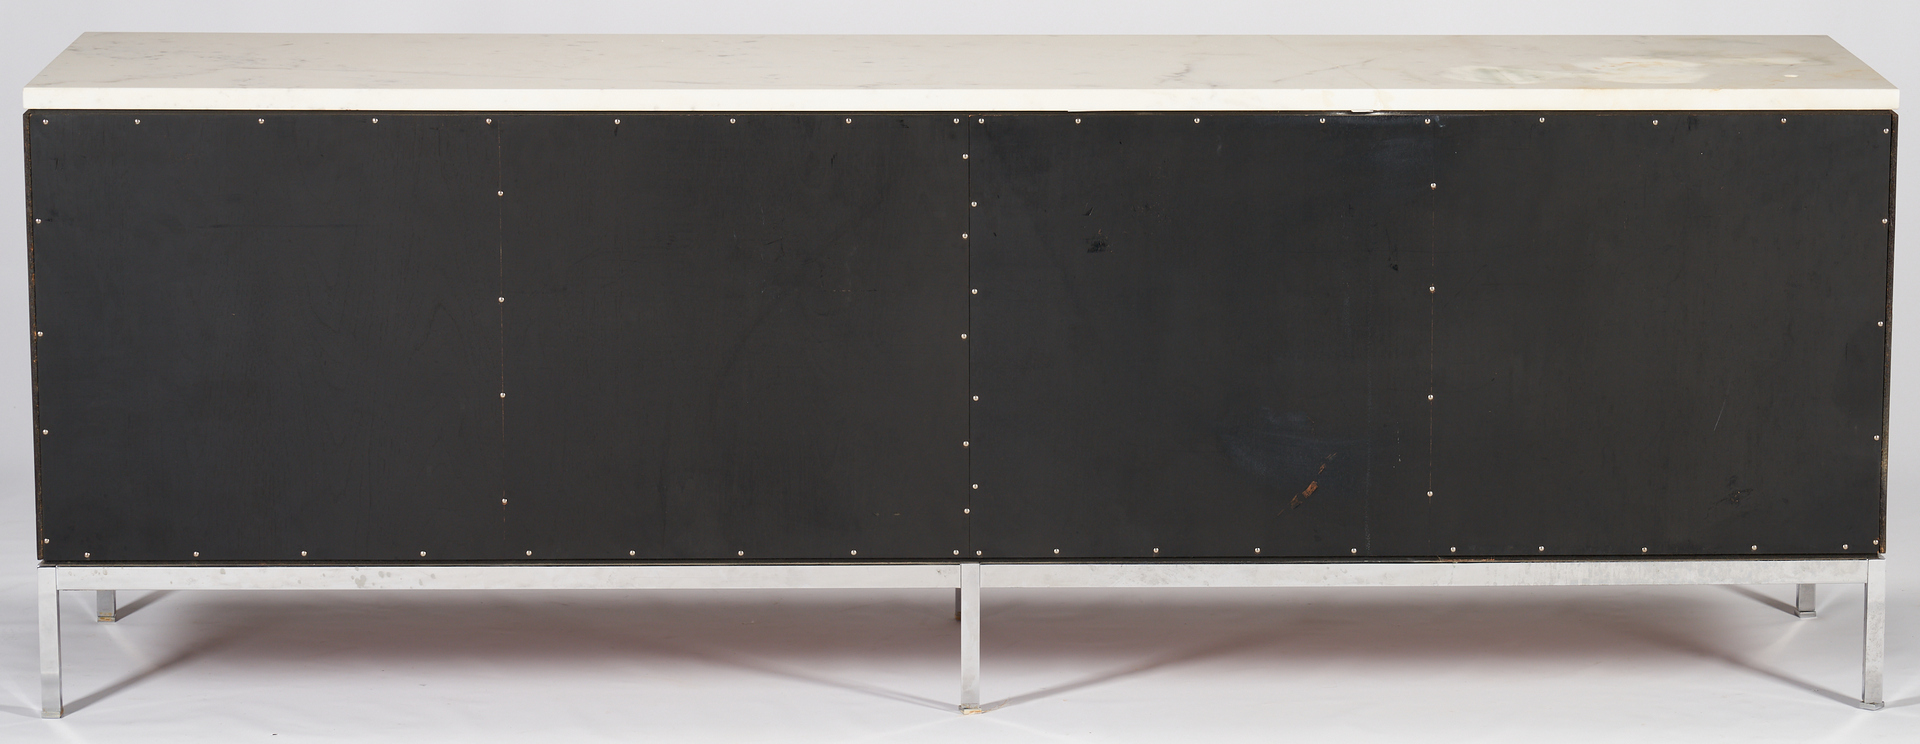 Lot 233: 1960s Florence Knoll Credenza, Marble Top